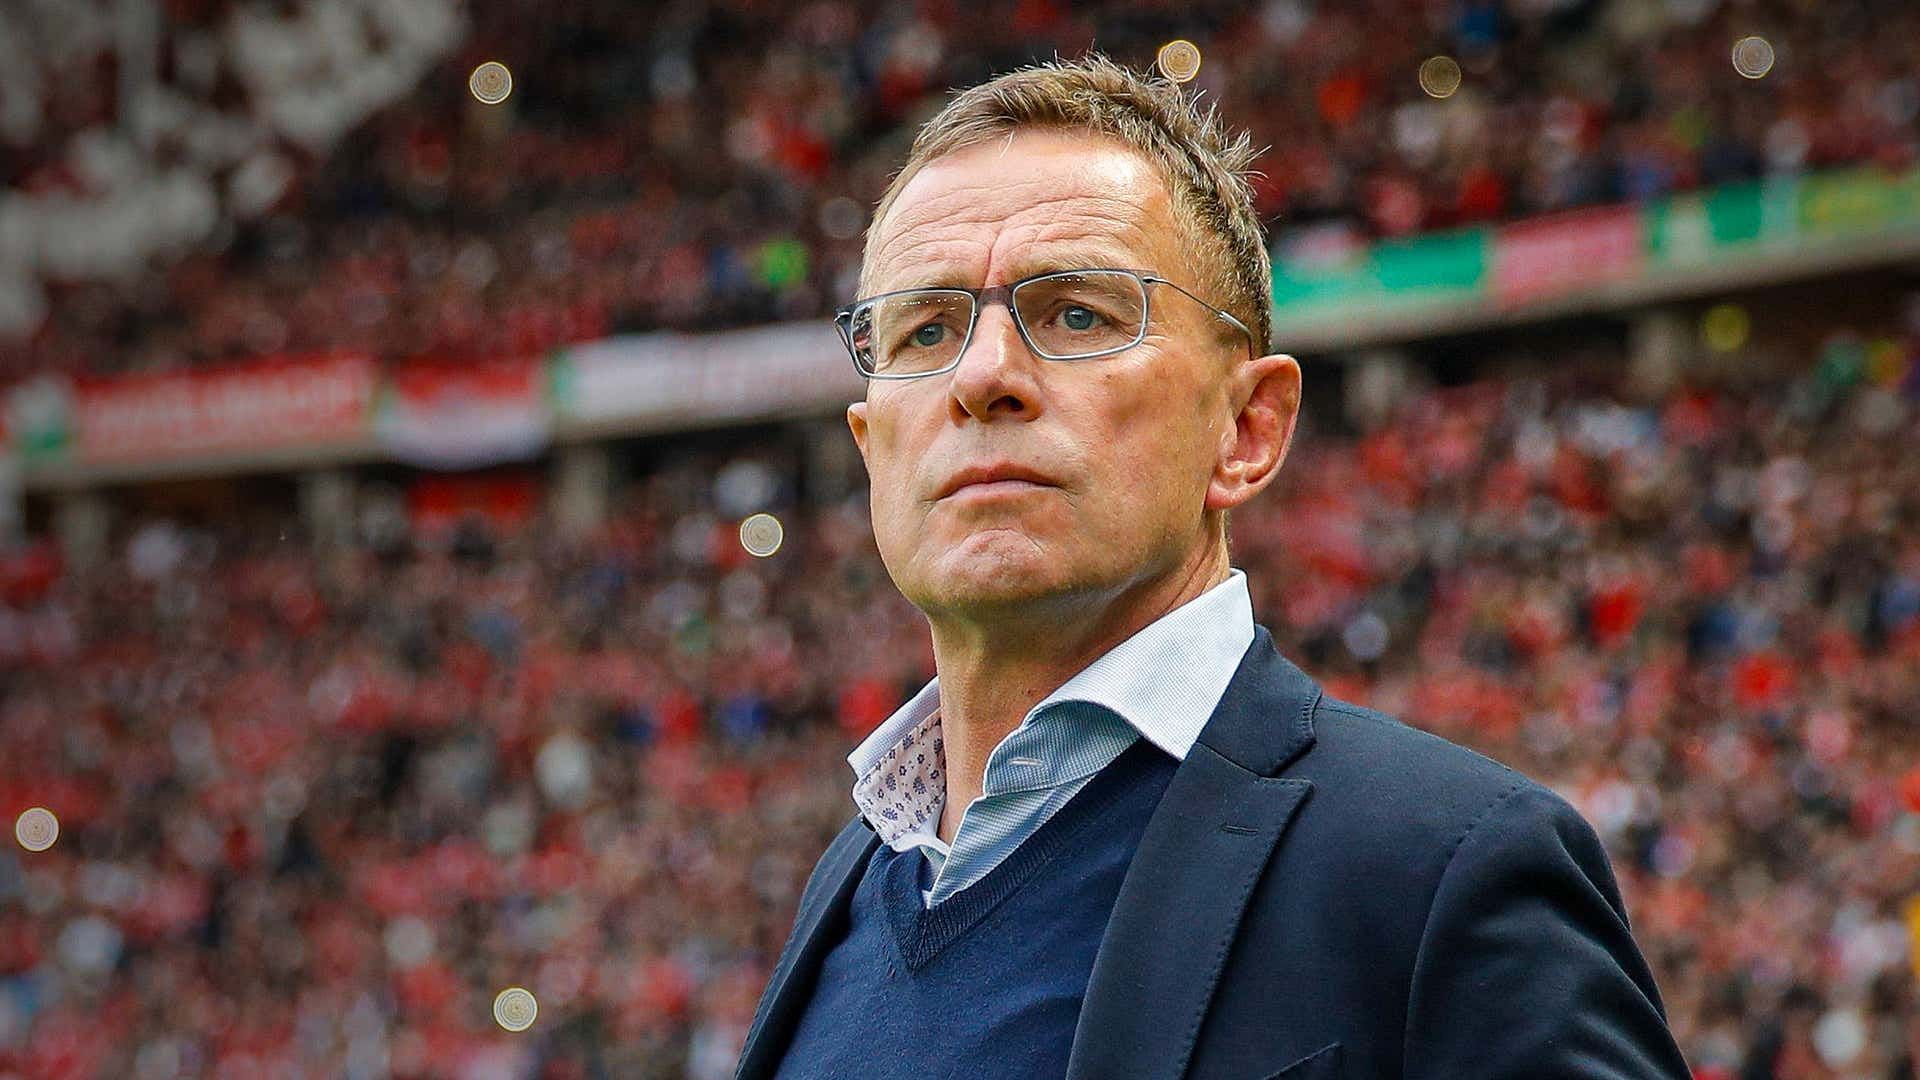 Ralf Rangnick is hailed by fellow manager Jurgen Klopp as someone who has built two clubs from ground up.